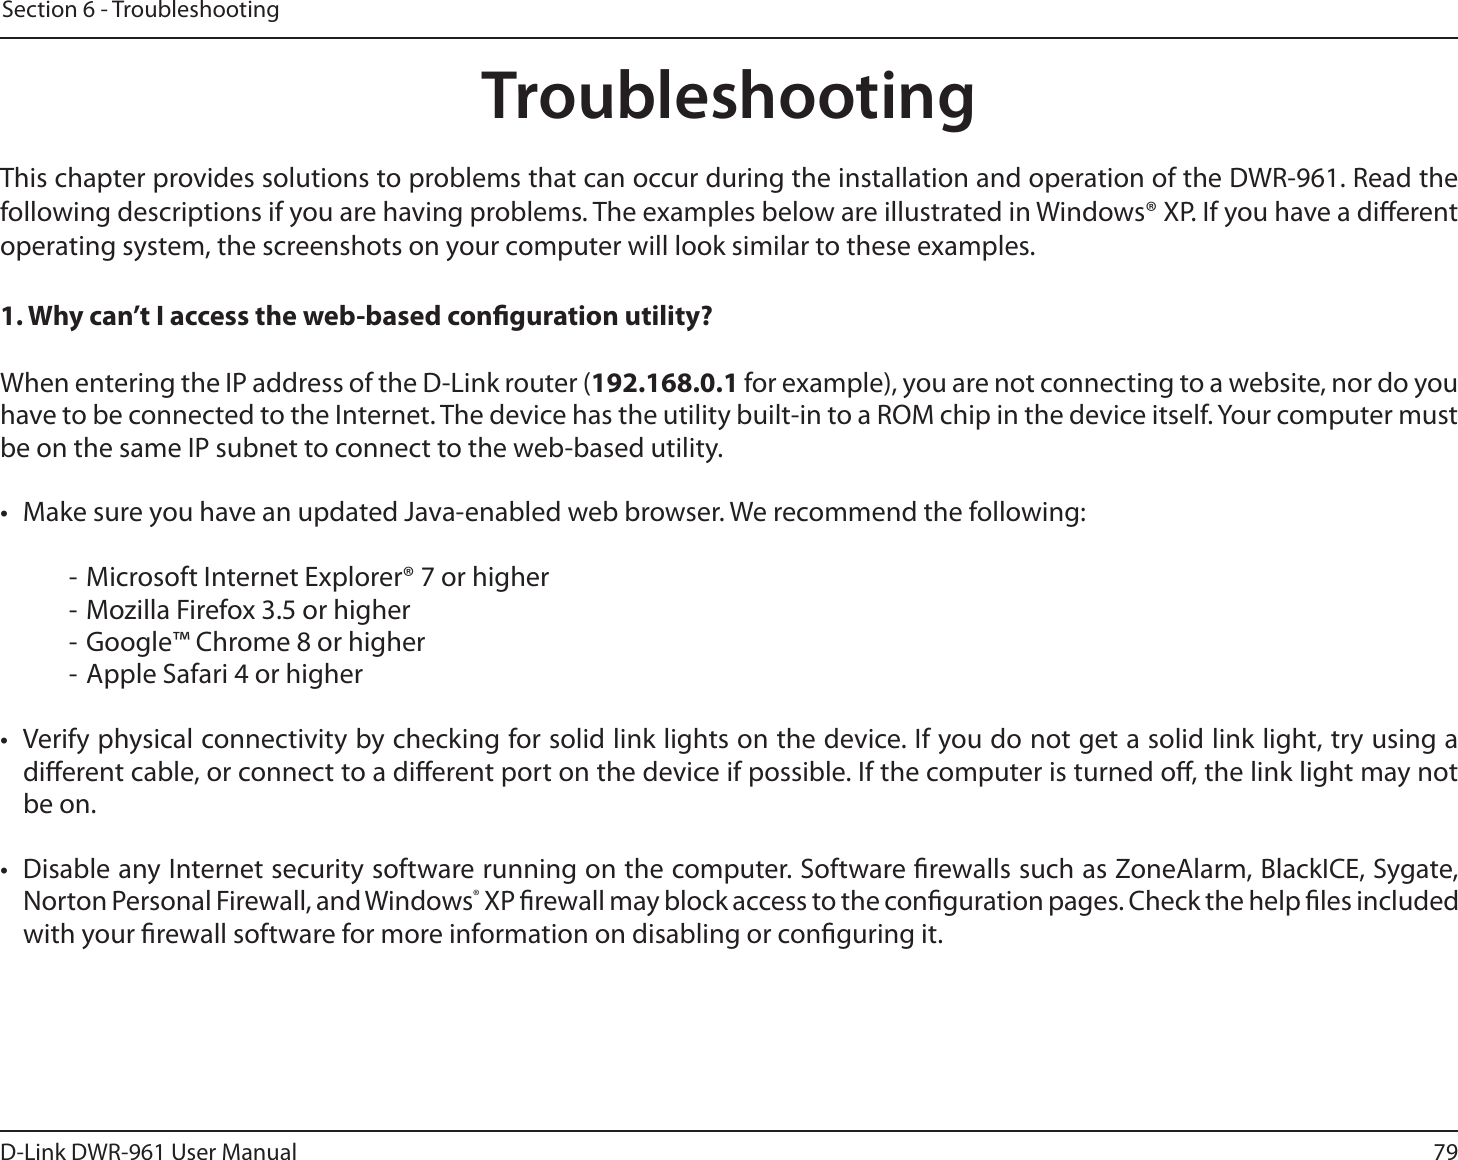 79D-Link DWR-9 User ManualSection 6 - TroubleshootingTroubleshootingThis chapter provides solutions to problems that can occur during the installation and operation of the DWR-9. Read the following descriptions if you are having problems. The examples below are illustrated in Windows® XP. If you have a dierent operating system, the screenshots on your computer will look similar to these examples.1. Why can’t I access the web-based conguration utility?When entering the IP address of the D-Link router (192.168.0.1 for example), you are not connecting to a website, nor do you have to be connected to the Internet. The device has the utility built-in to a ROM chip in the device itself. Your computer must be on the same IP subnet to connect to the web-based utility. •  Make sure you have an updated Java-enabled web browser. We recommend the following:  - Microsoft Internet Explorer® 7 or higher- Mozilla Firefox 3.5 or higher- Google™ Chrome 8 or higher- Apple Safari 4 or higher•  Verify physical connectivity by checking for solid link lights on the device. If you do not get a solid link light, try using a dierent cable, or connect to a dierent port on the device if possible. If the computer is turned o, the link light may not be on.•  Disable any Internet security software running on the computer. Software rewalls such as ZoneAlarm, BlackICE, Sygate, Norton Personal Firewall, and Windows® XP rewall may block access to the conguration pages. Check the help les included with your rewall software for more information on disabling or conguring it.